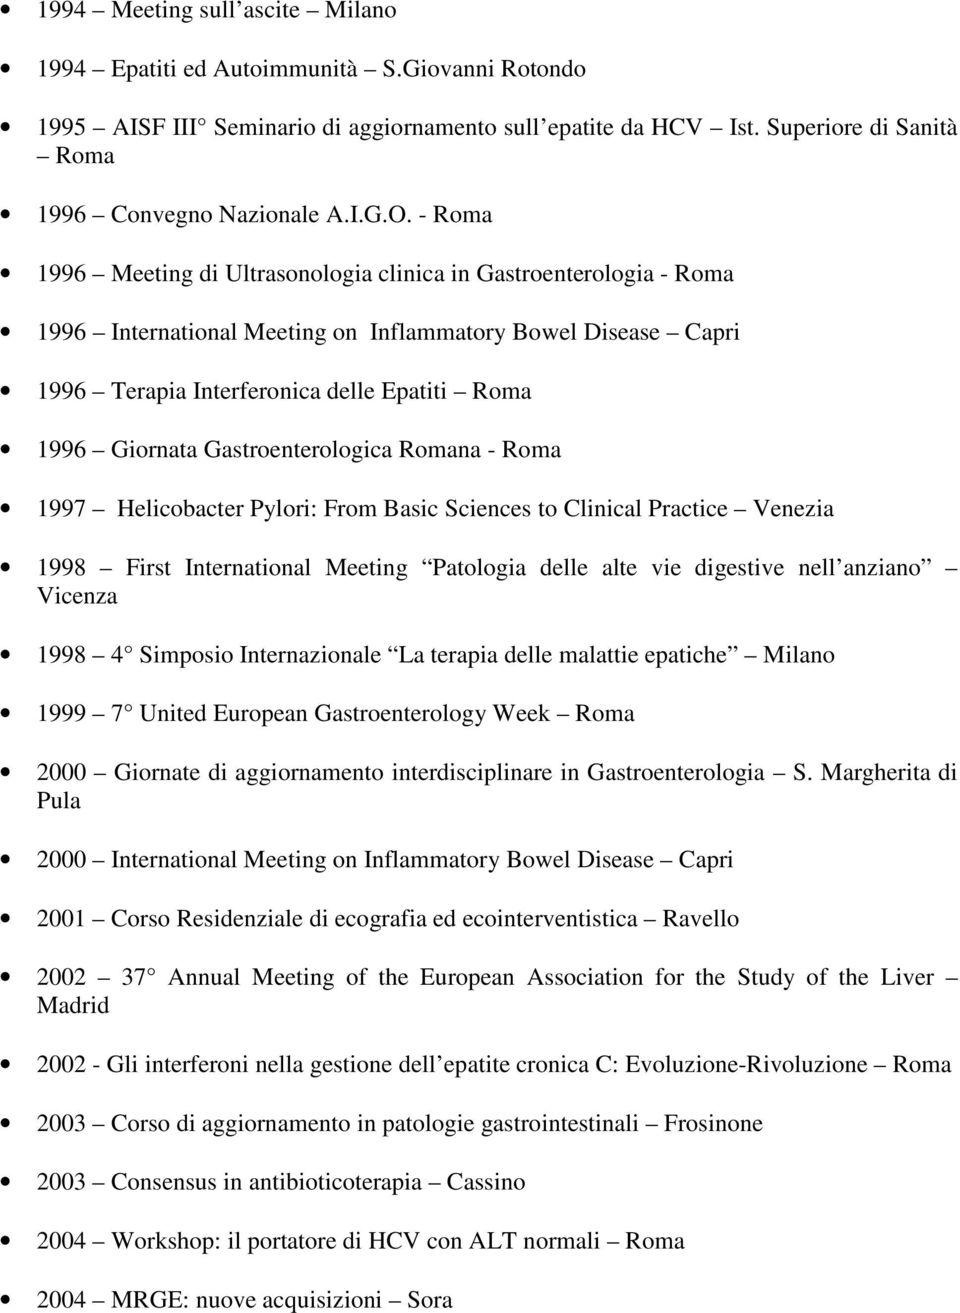 Gastroenterologica na - 1997 Helicobacter Pylori: From Basic Sciences to Clinical Practice Venezia 1998 First International Meeting Patologia delle alte vie digestive nell anziano Vicenza 1998 4